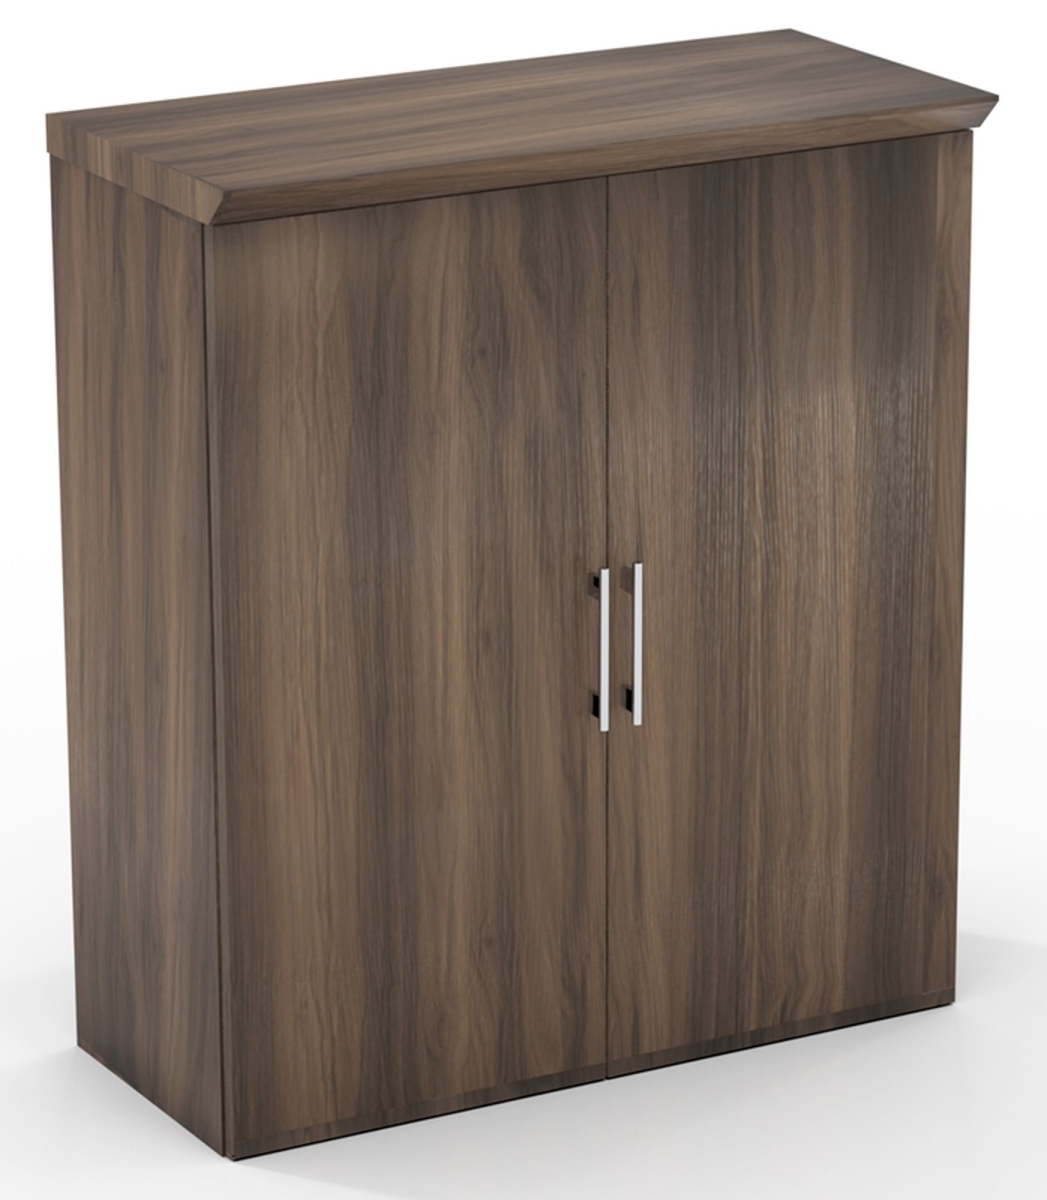 Stscwdtbs Sterling Storage Cabinet With Wood Doors - Textured Brown Sugar - 41.62 X 36 X 16.5 In.